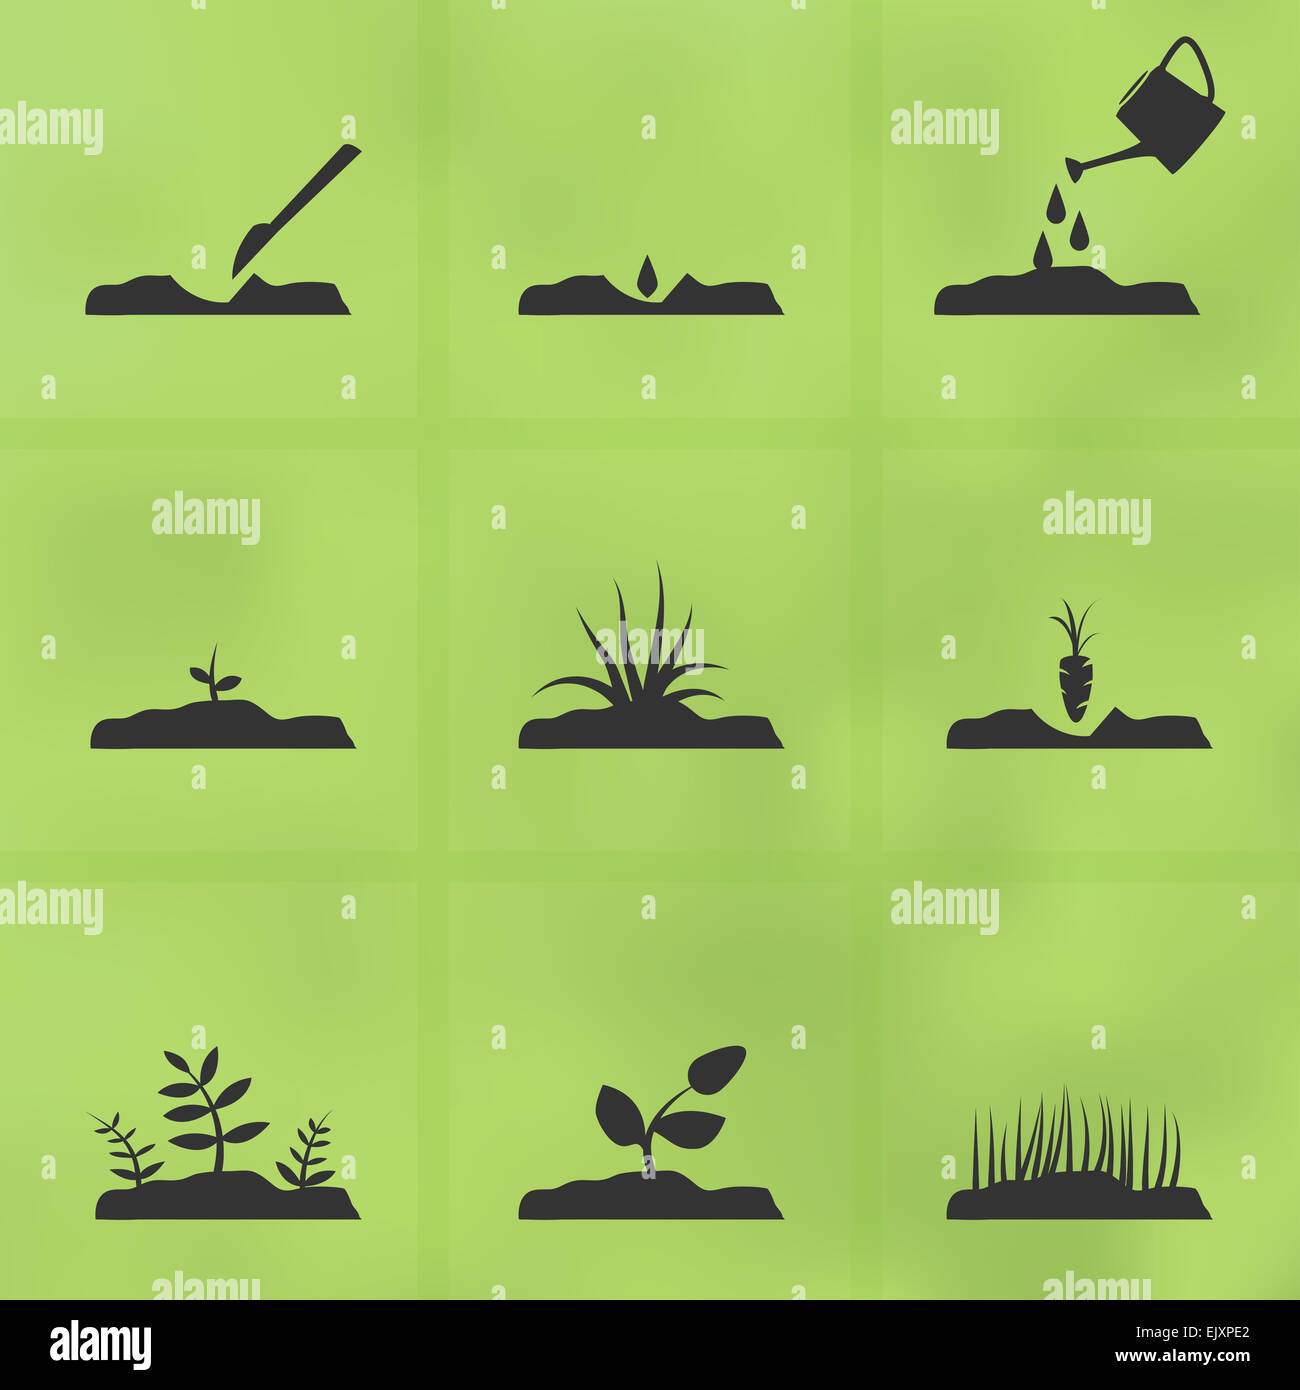 Set of garden icons, illustrating stages of growing plant from seeds. Stock Photo